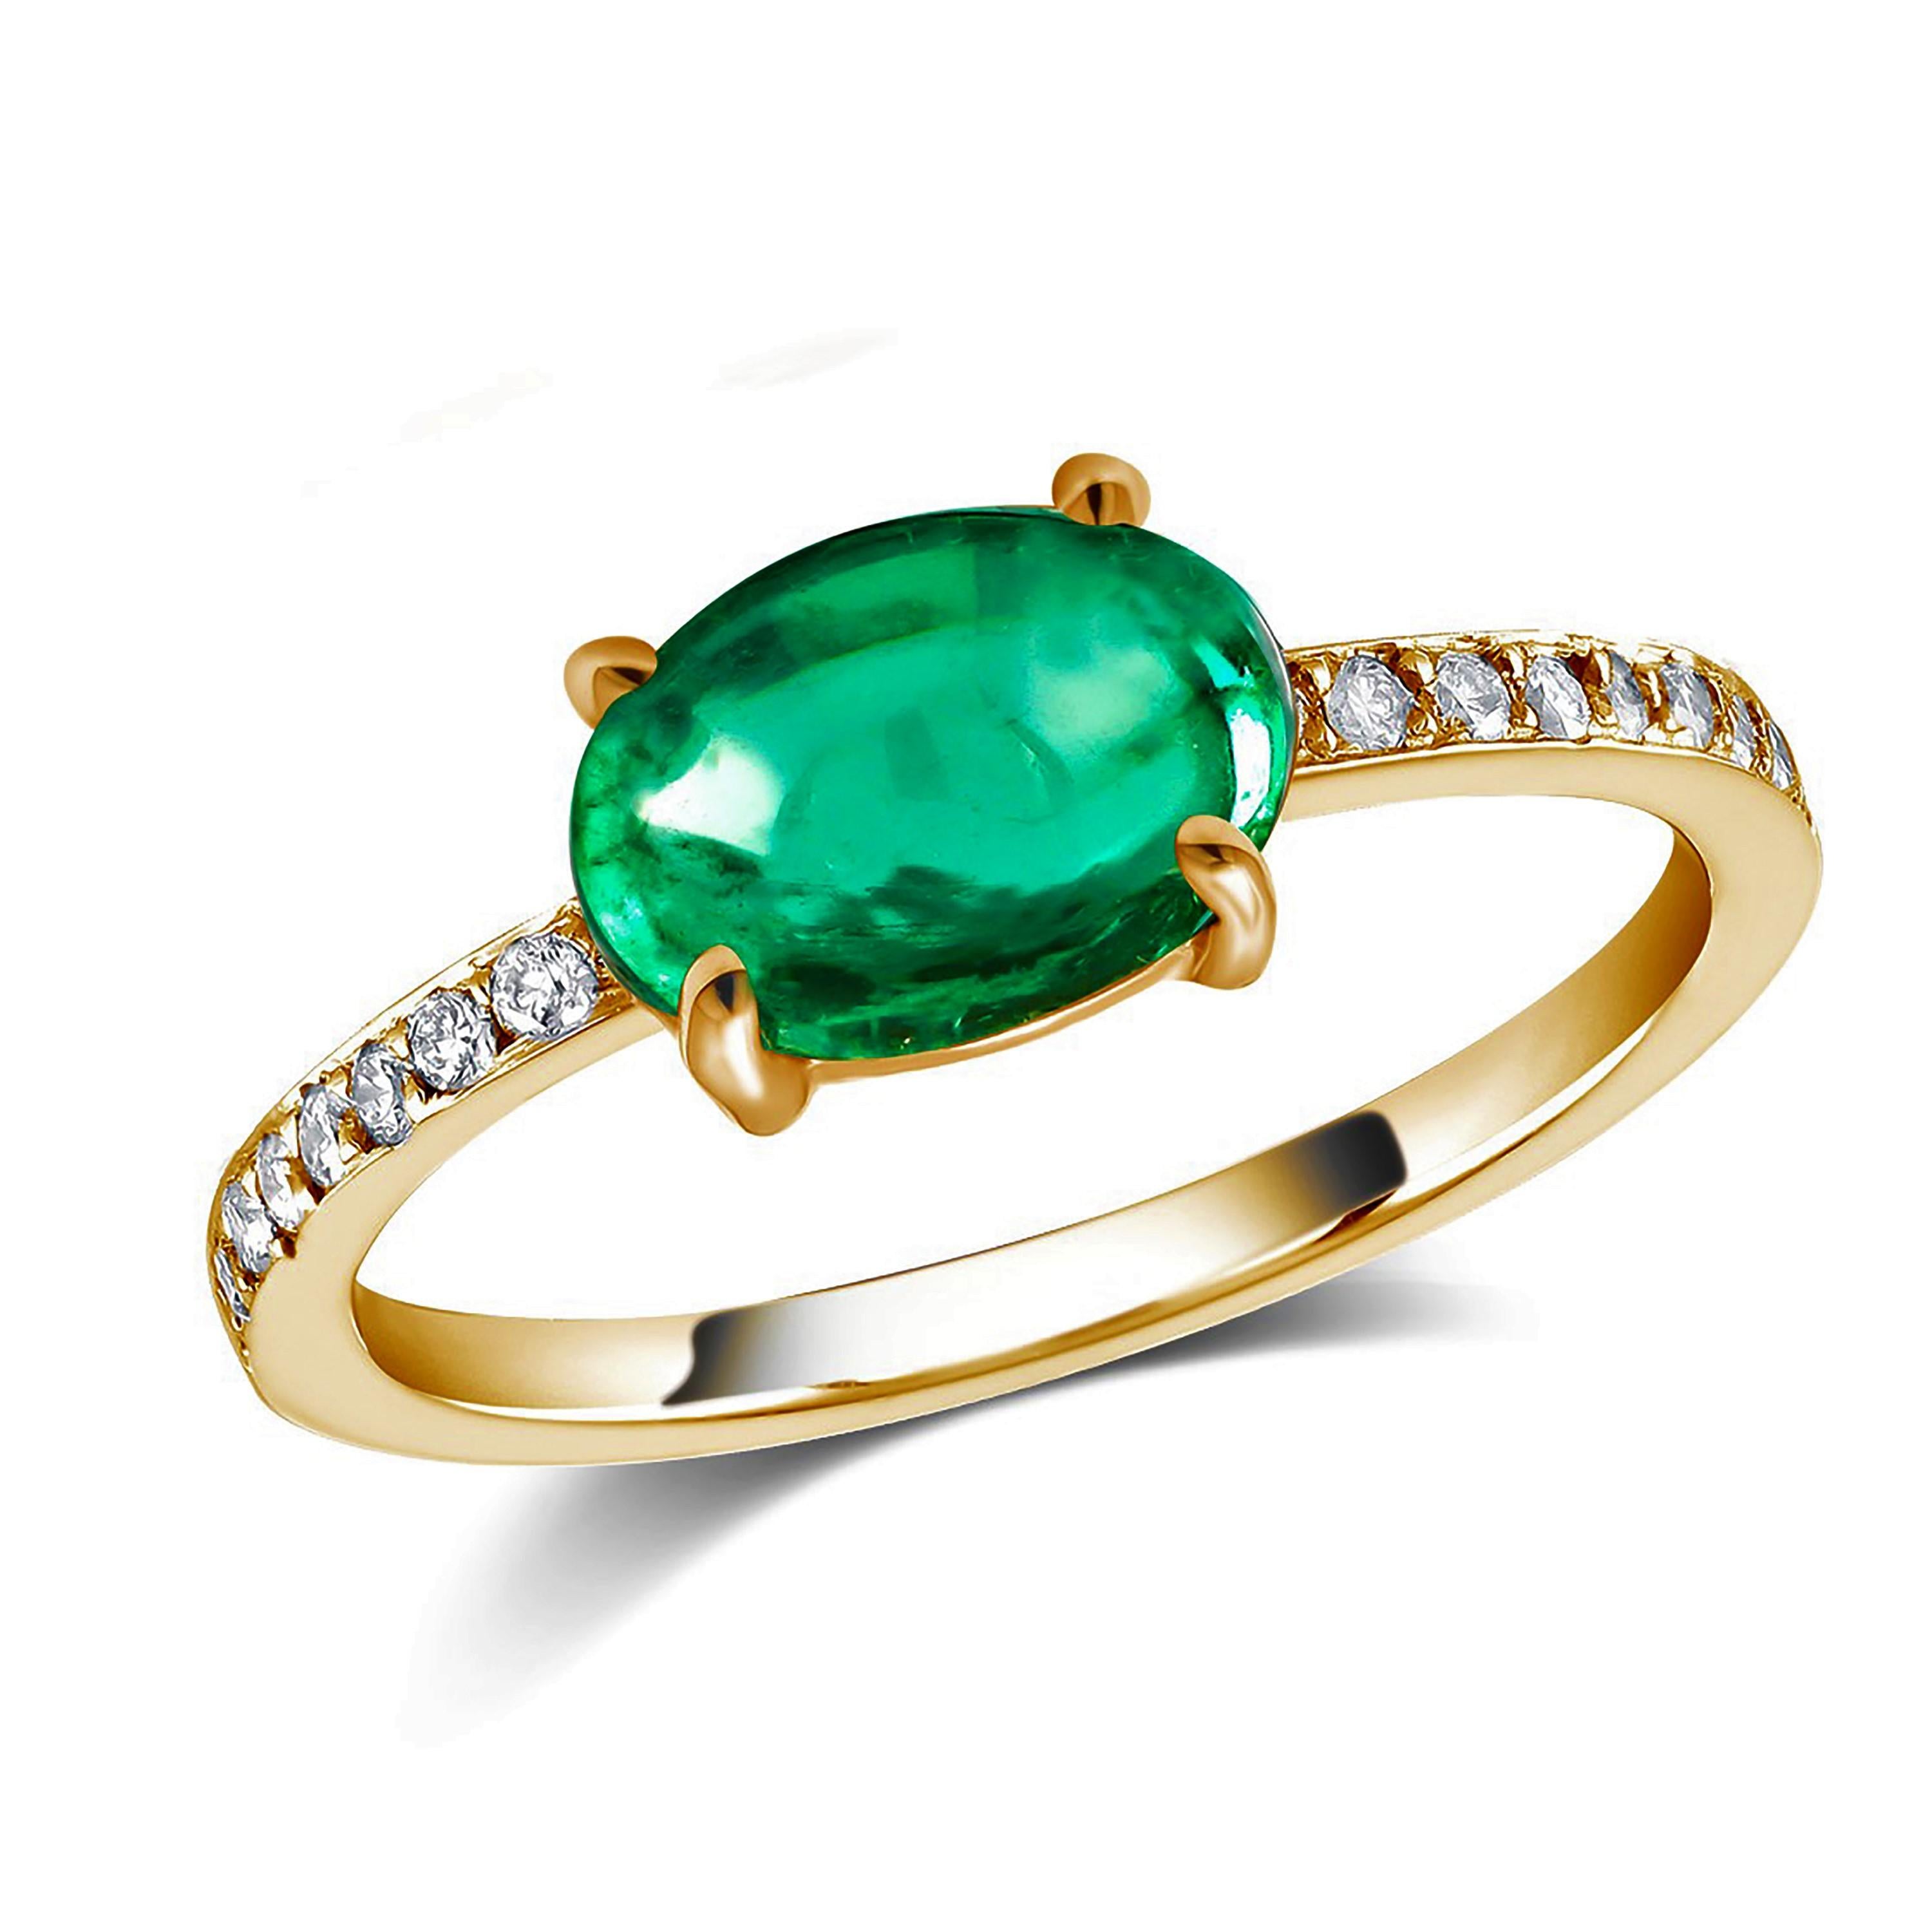 Fourteen karats delicate yellow gold cabochon emerald and diamond ring
Cabochon emerald weighing 1.89 carat 
Diamond weighing 0.25     
Emerald measuring 9x7 millimeter
Emerald hue tone color dark forest green
Shank measuring 1.75mm width 
One of a